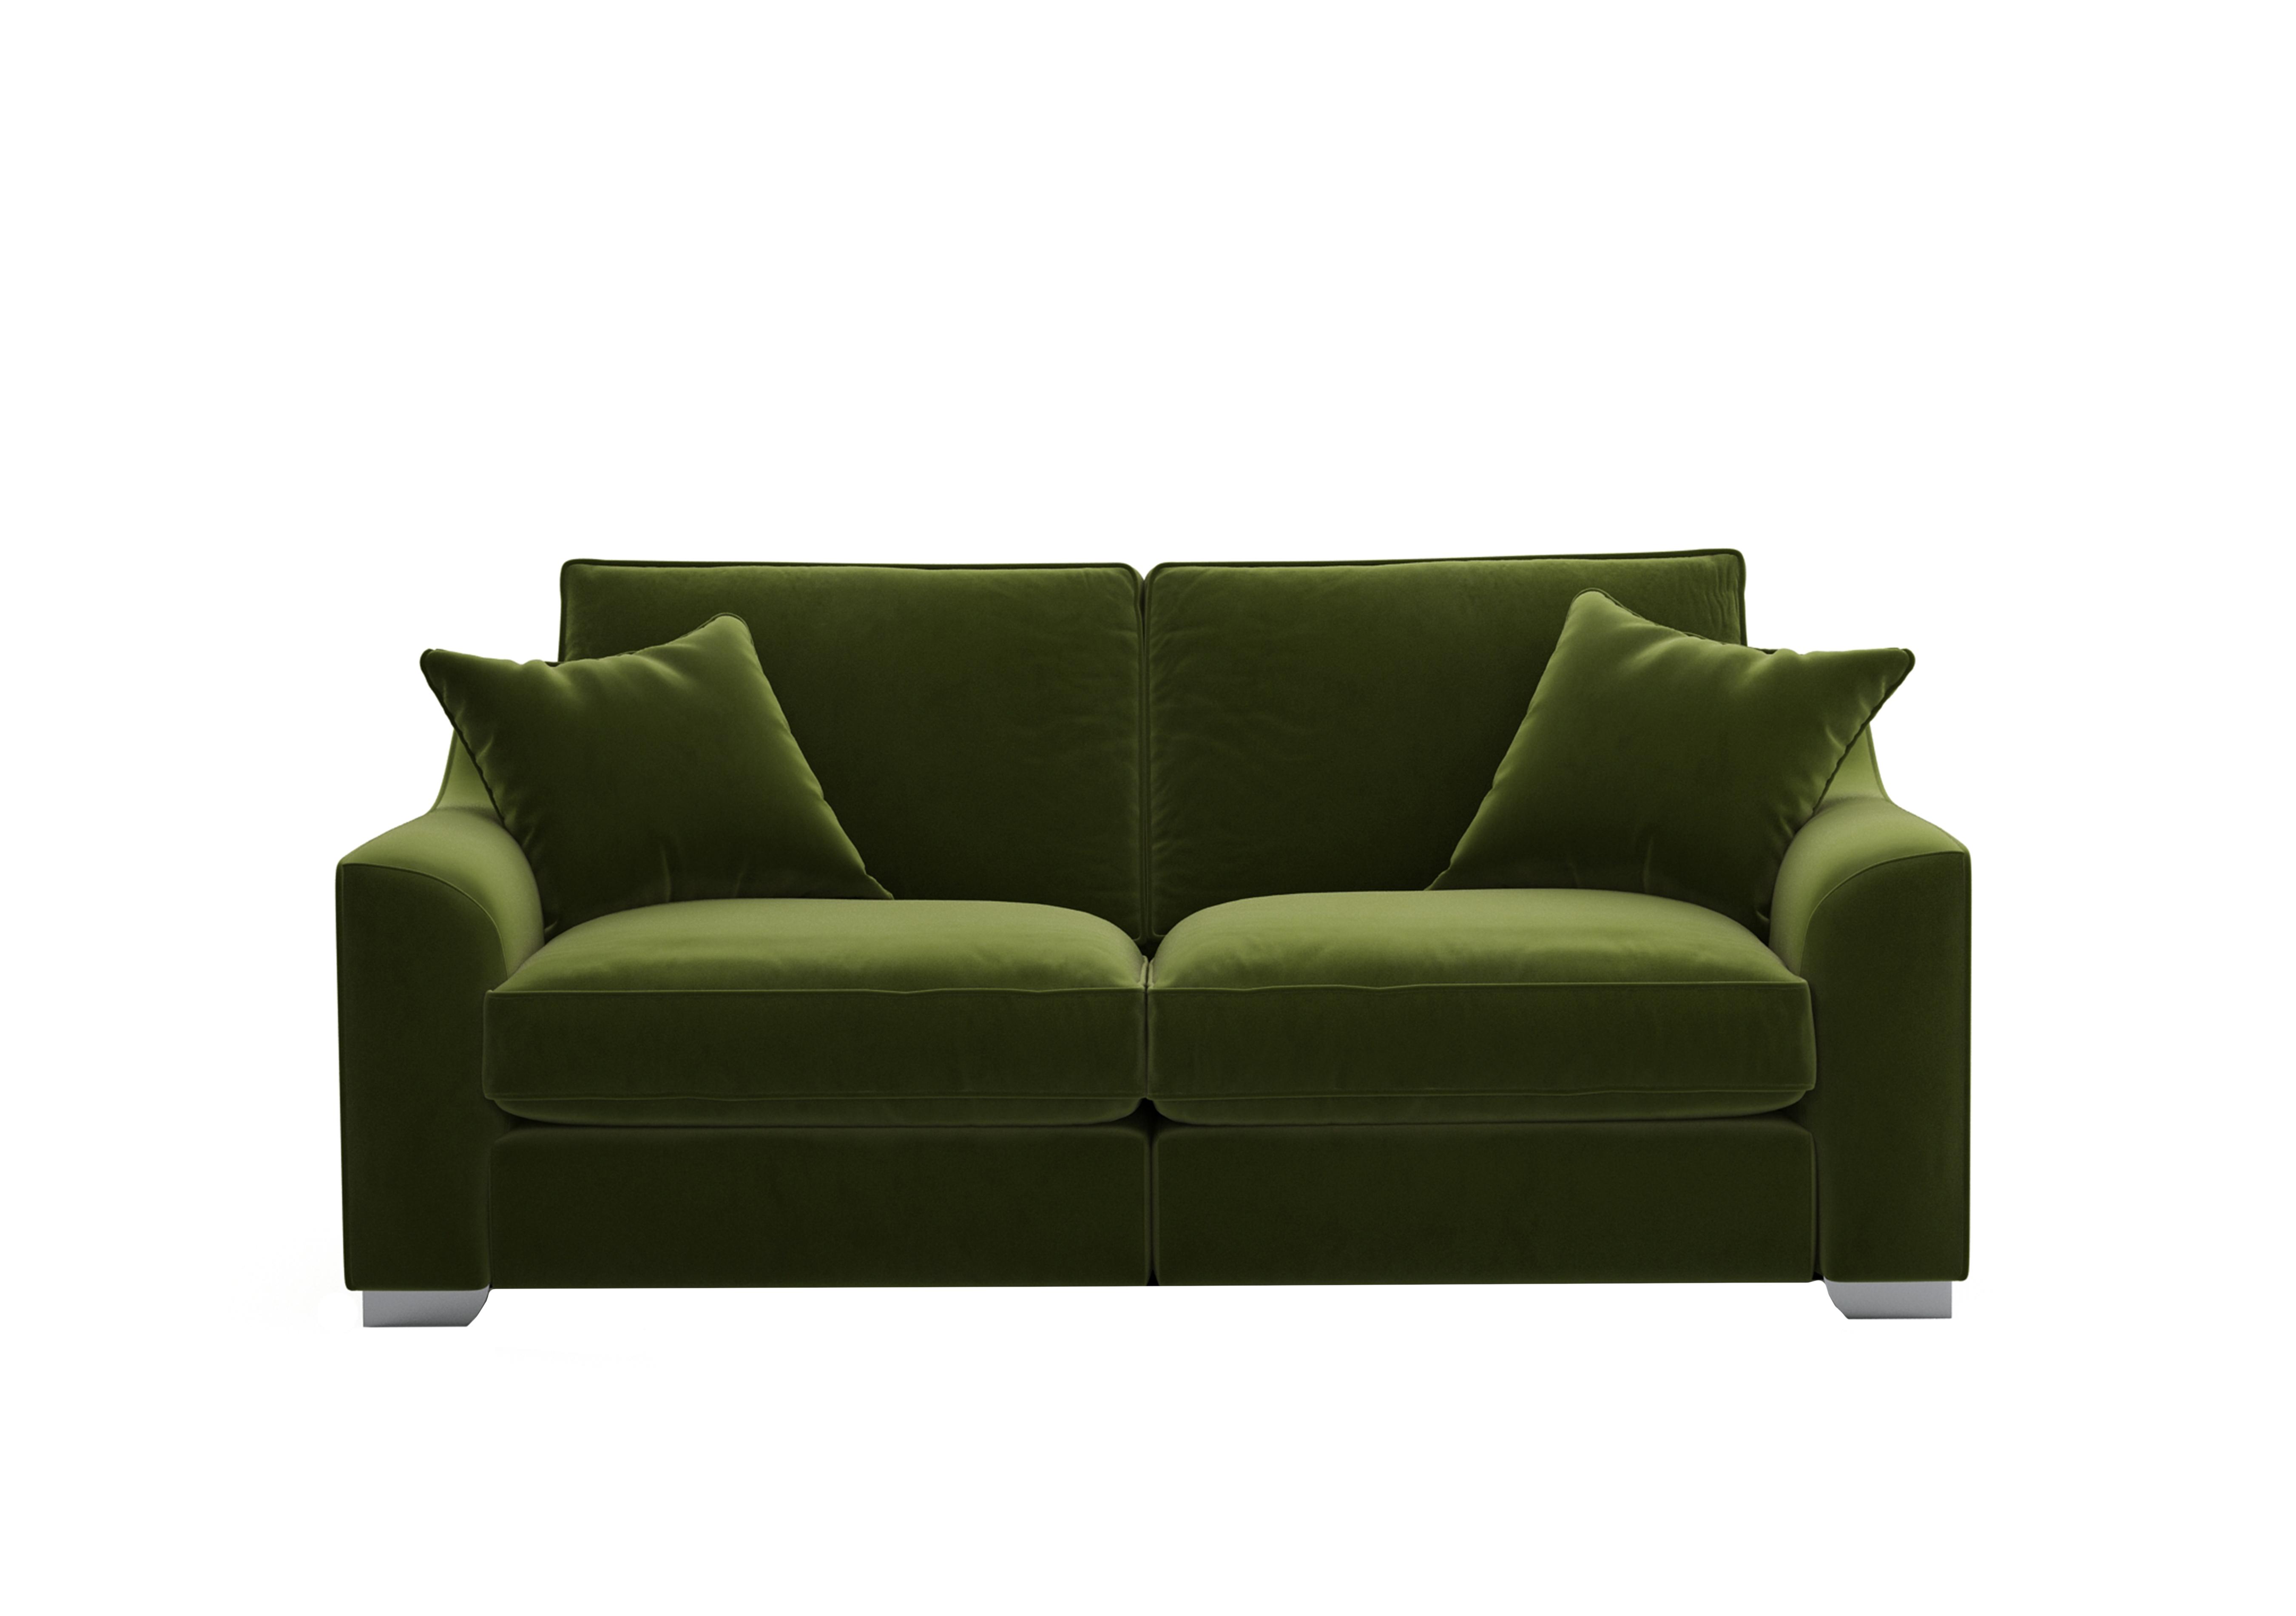 Isobel 3 Seater Fabric Sofa in Woo160 Woodland Moss Ch Ft on Furniture Village